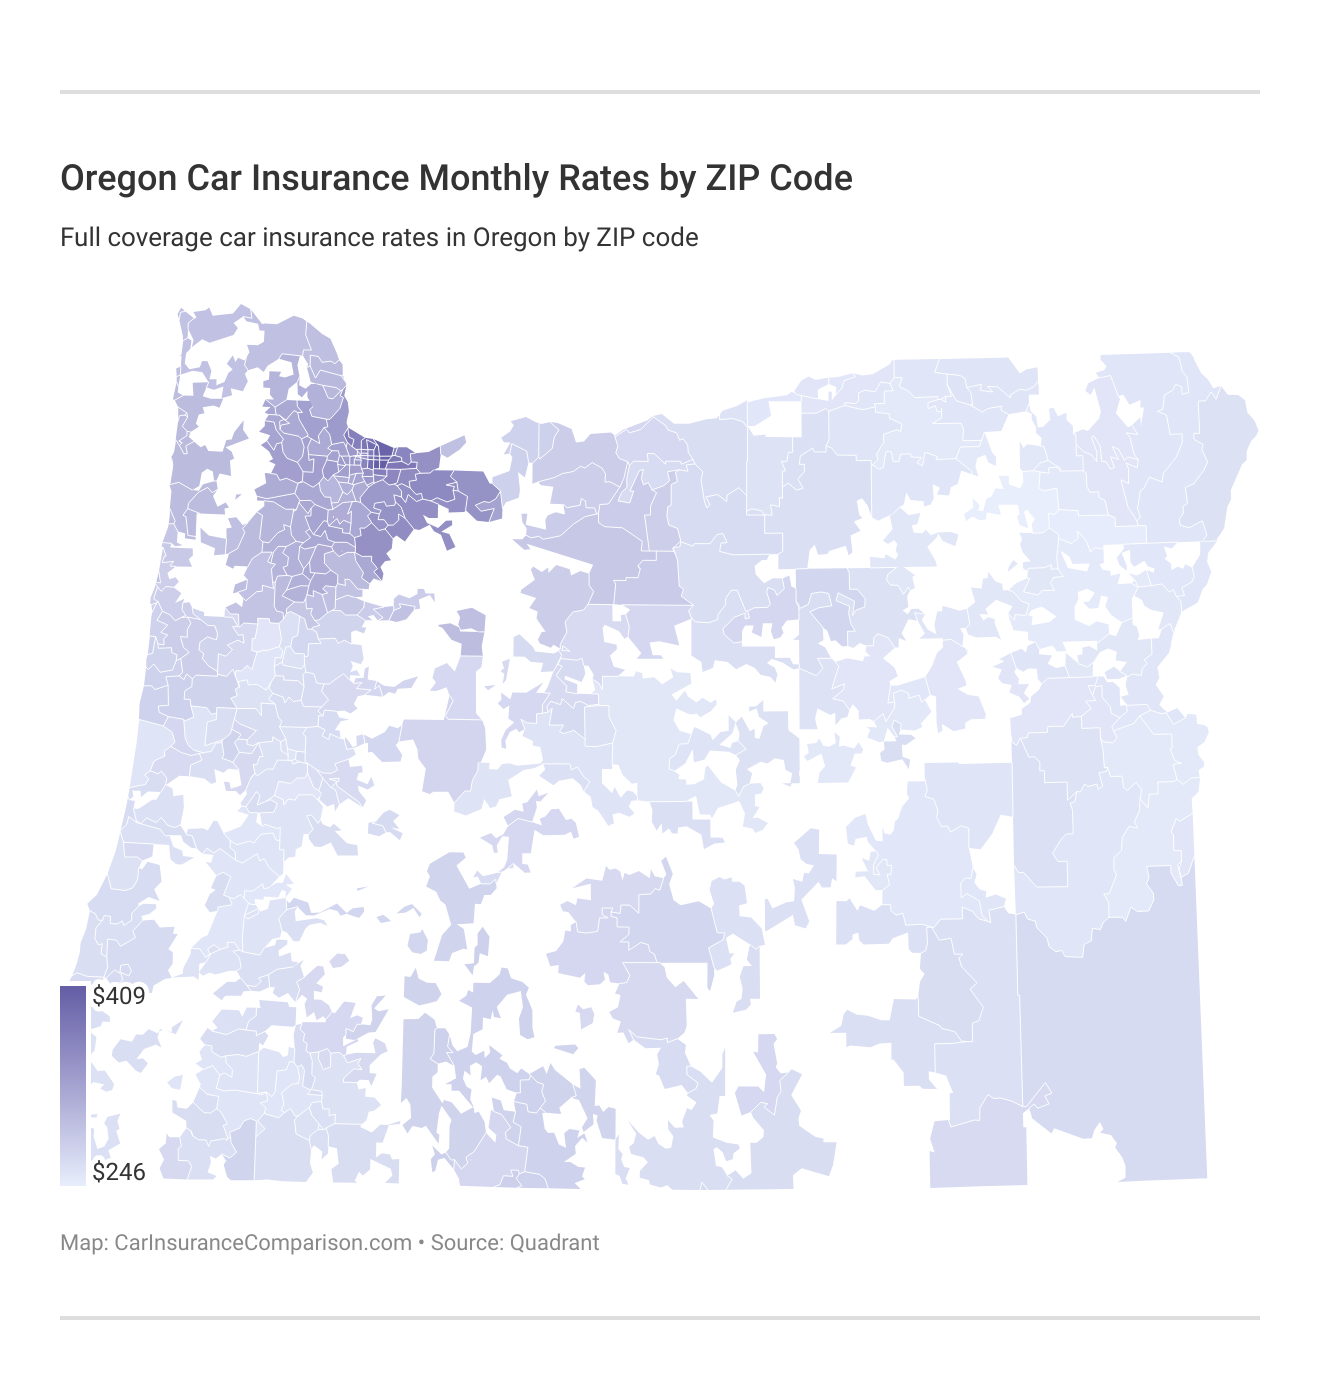 <h3>Oregon Car Insurance Monthly Rates by ZIP Code</h3>